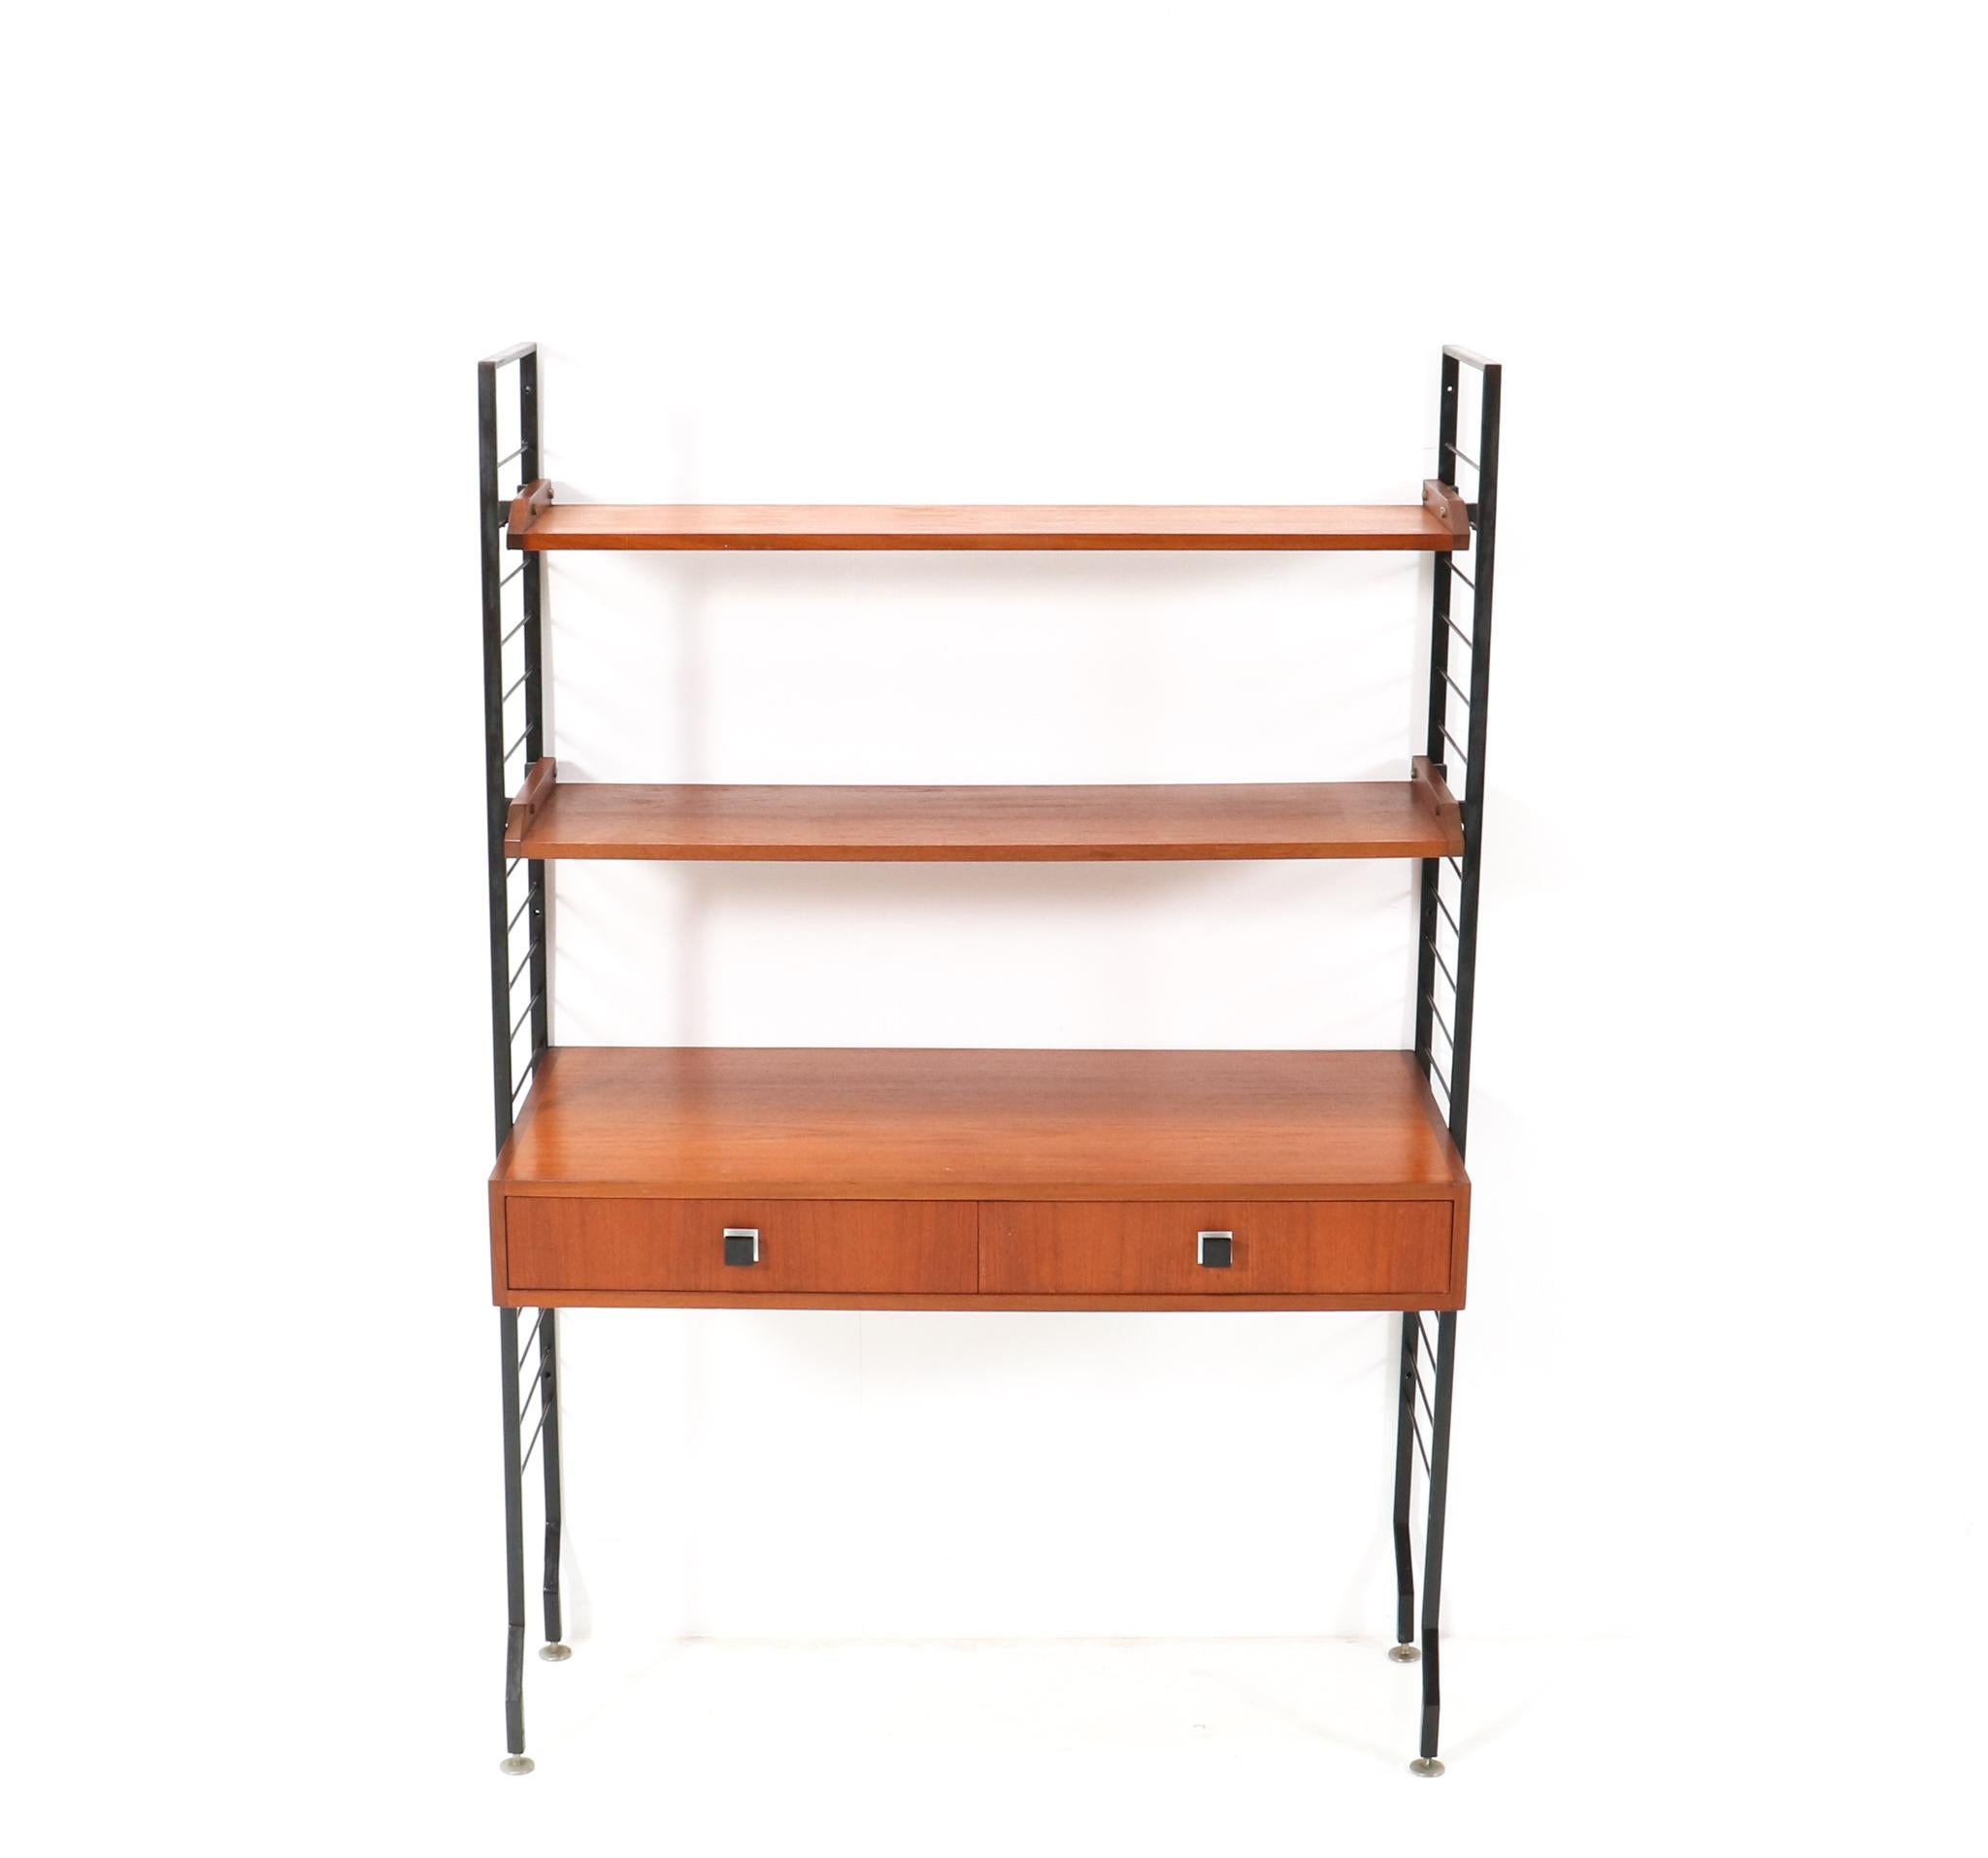 Magnificent and rare Mid-Century Modern freestanding shelving unit.
Striking Belgium design from the 1960s.
This wonderful Mid-Century Modern freestanding shelving unit consists of
Two original black lacquered iron uprights.
Two original teak